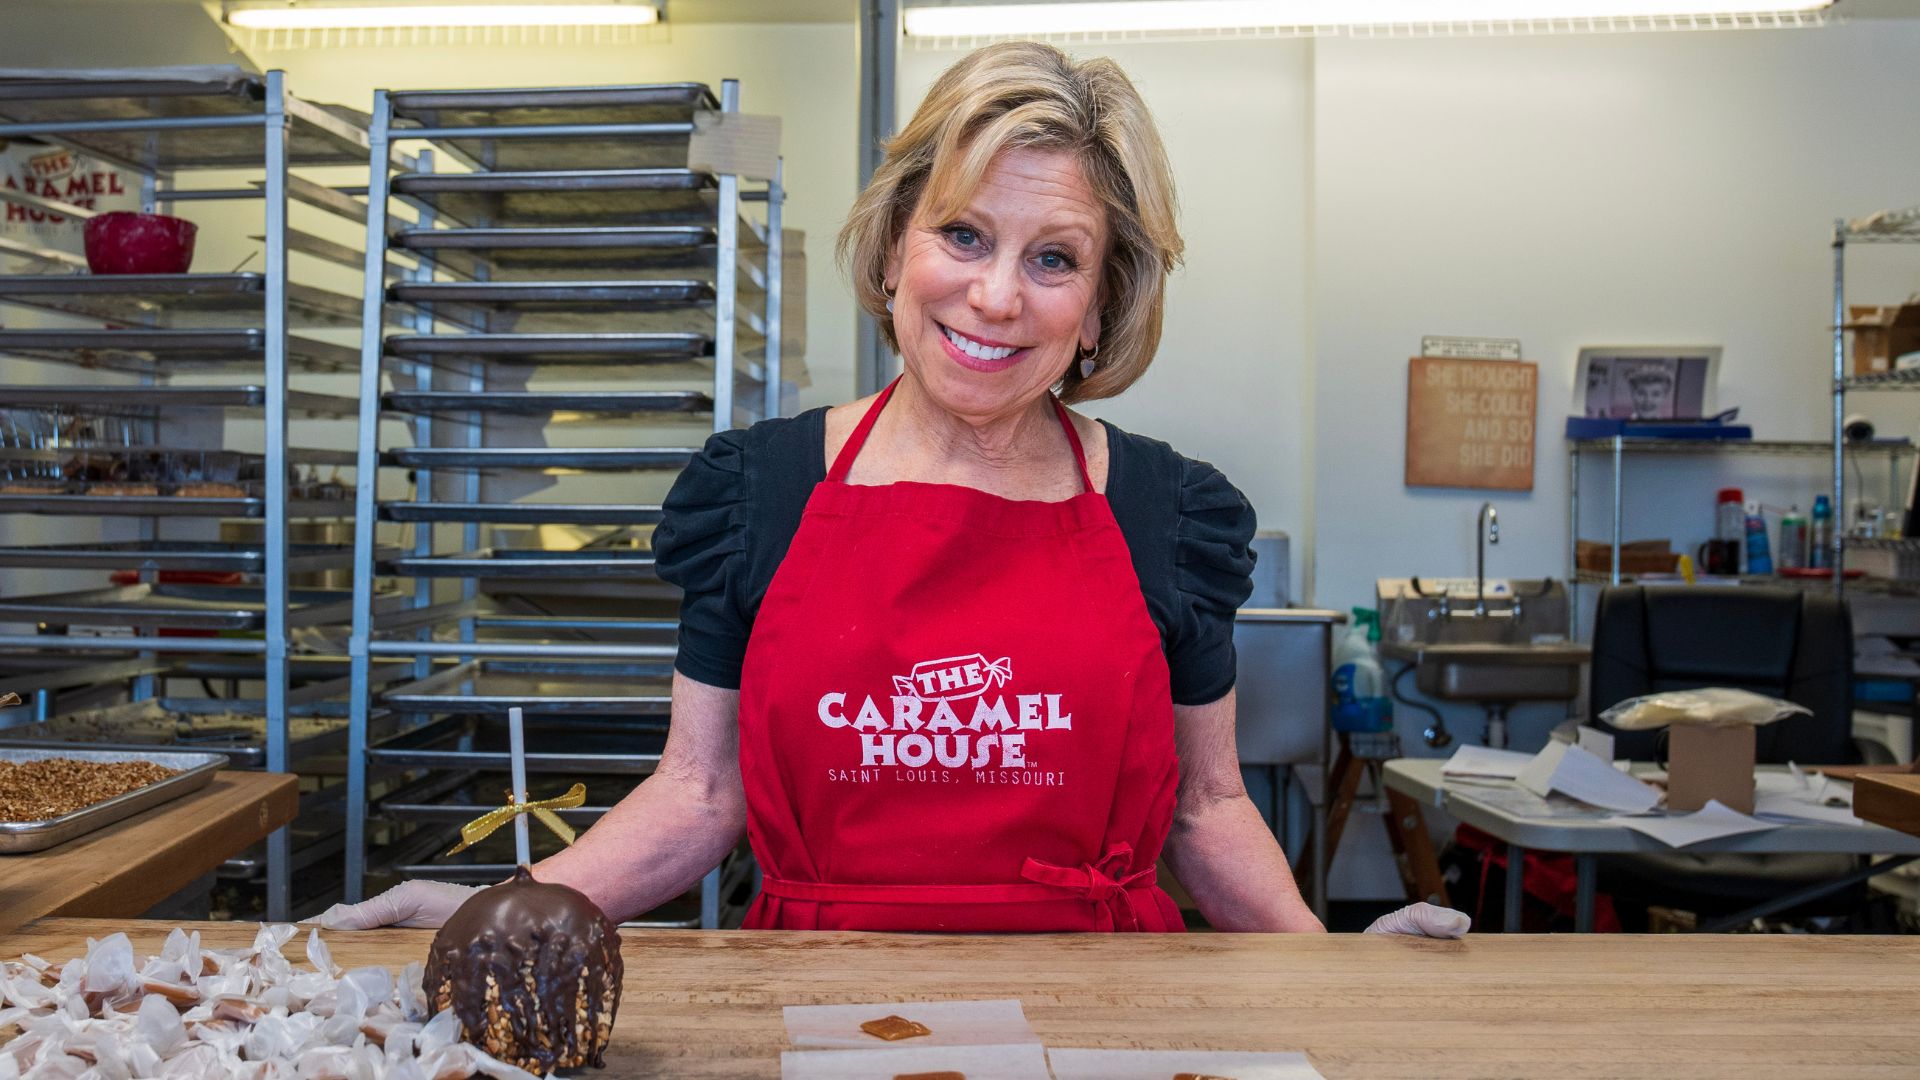 Janet Shulman owns and operates The Caramel House in St. Louis.